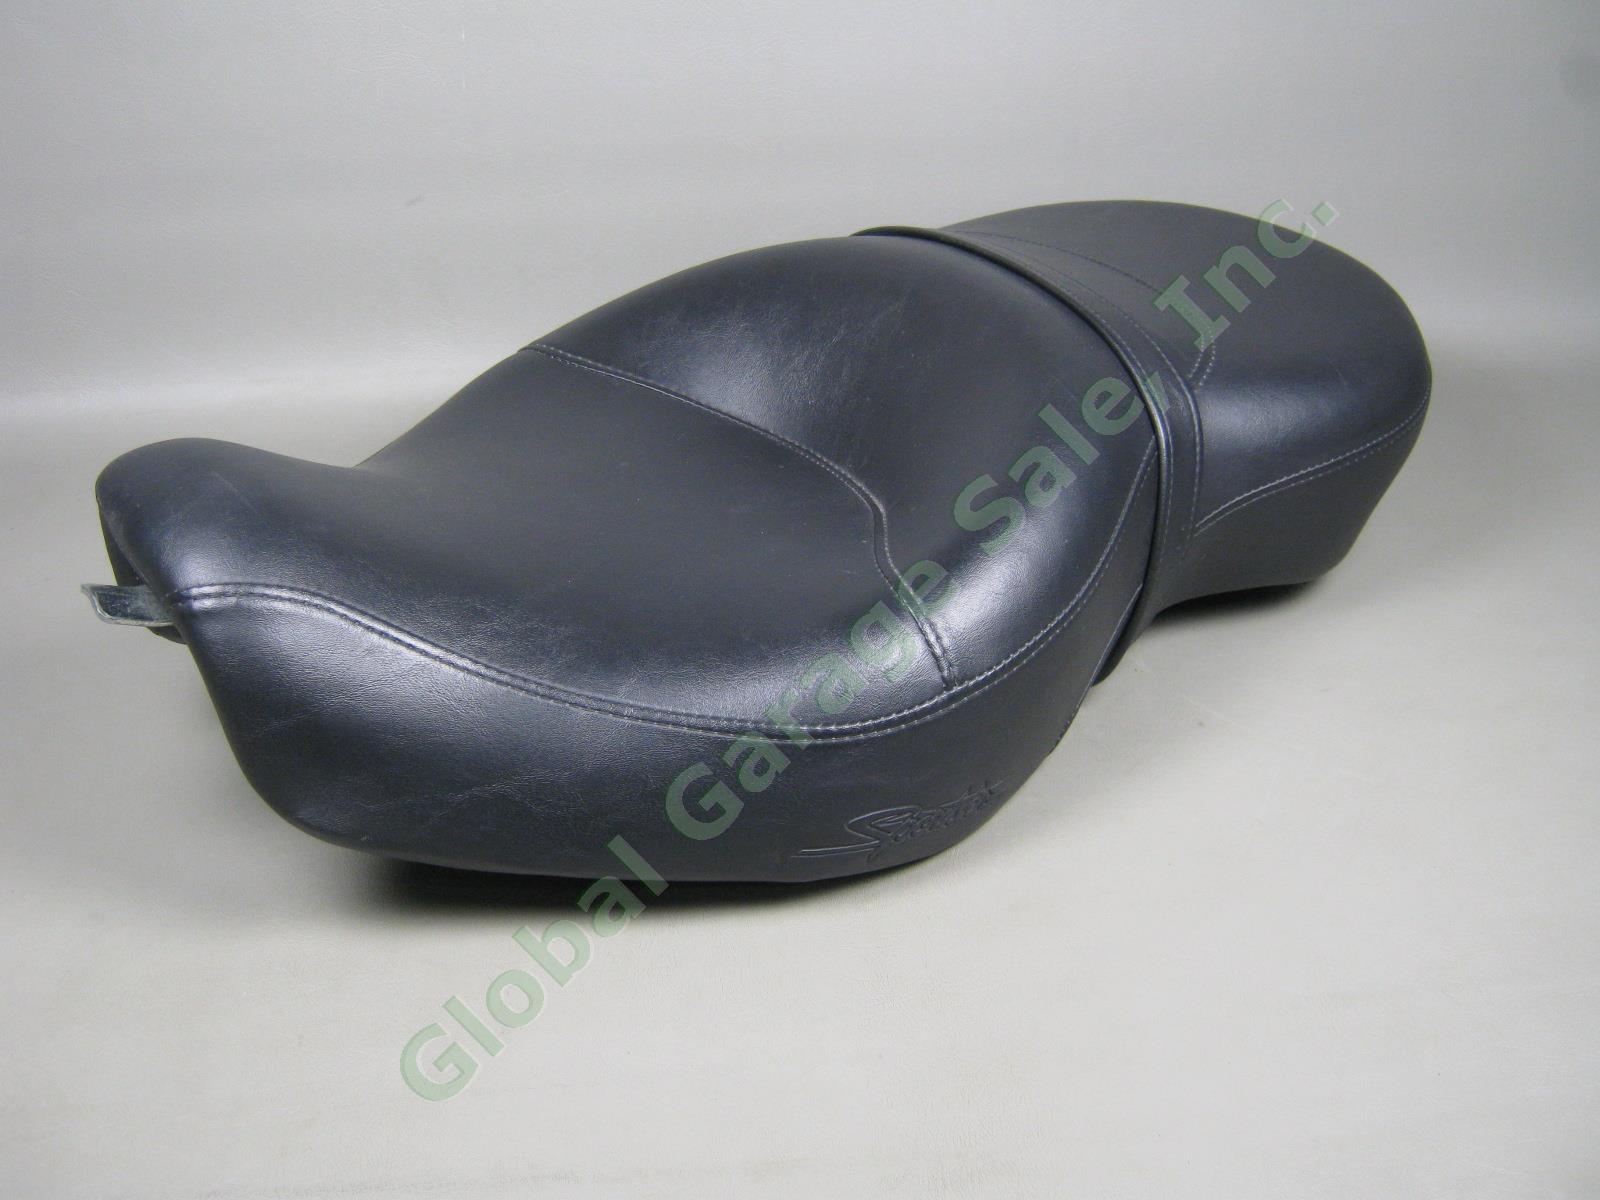 OEM Stock Harley-Davidson Sportster Touring Motorcycle Seat RDW-92/61-0067 Used 1